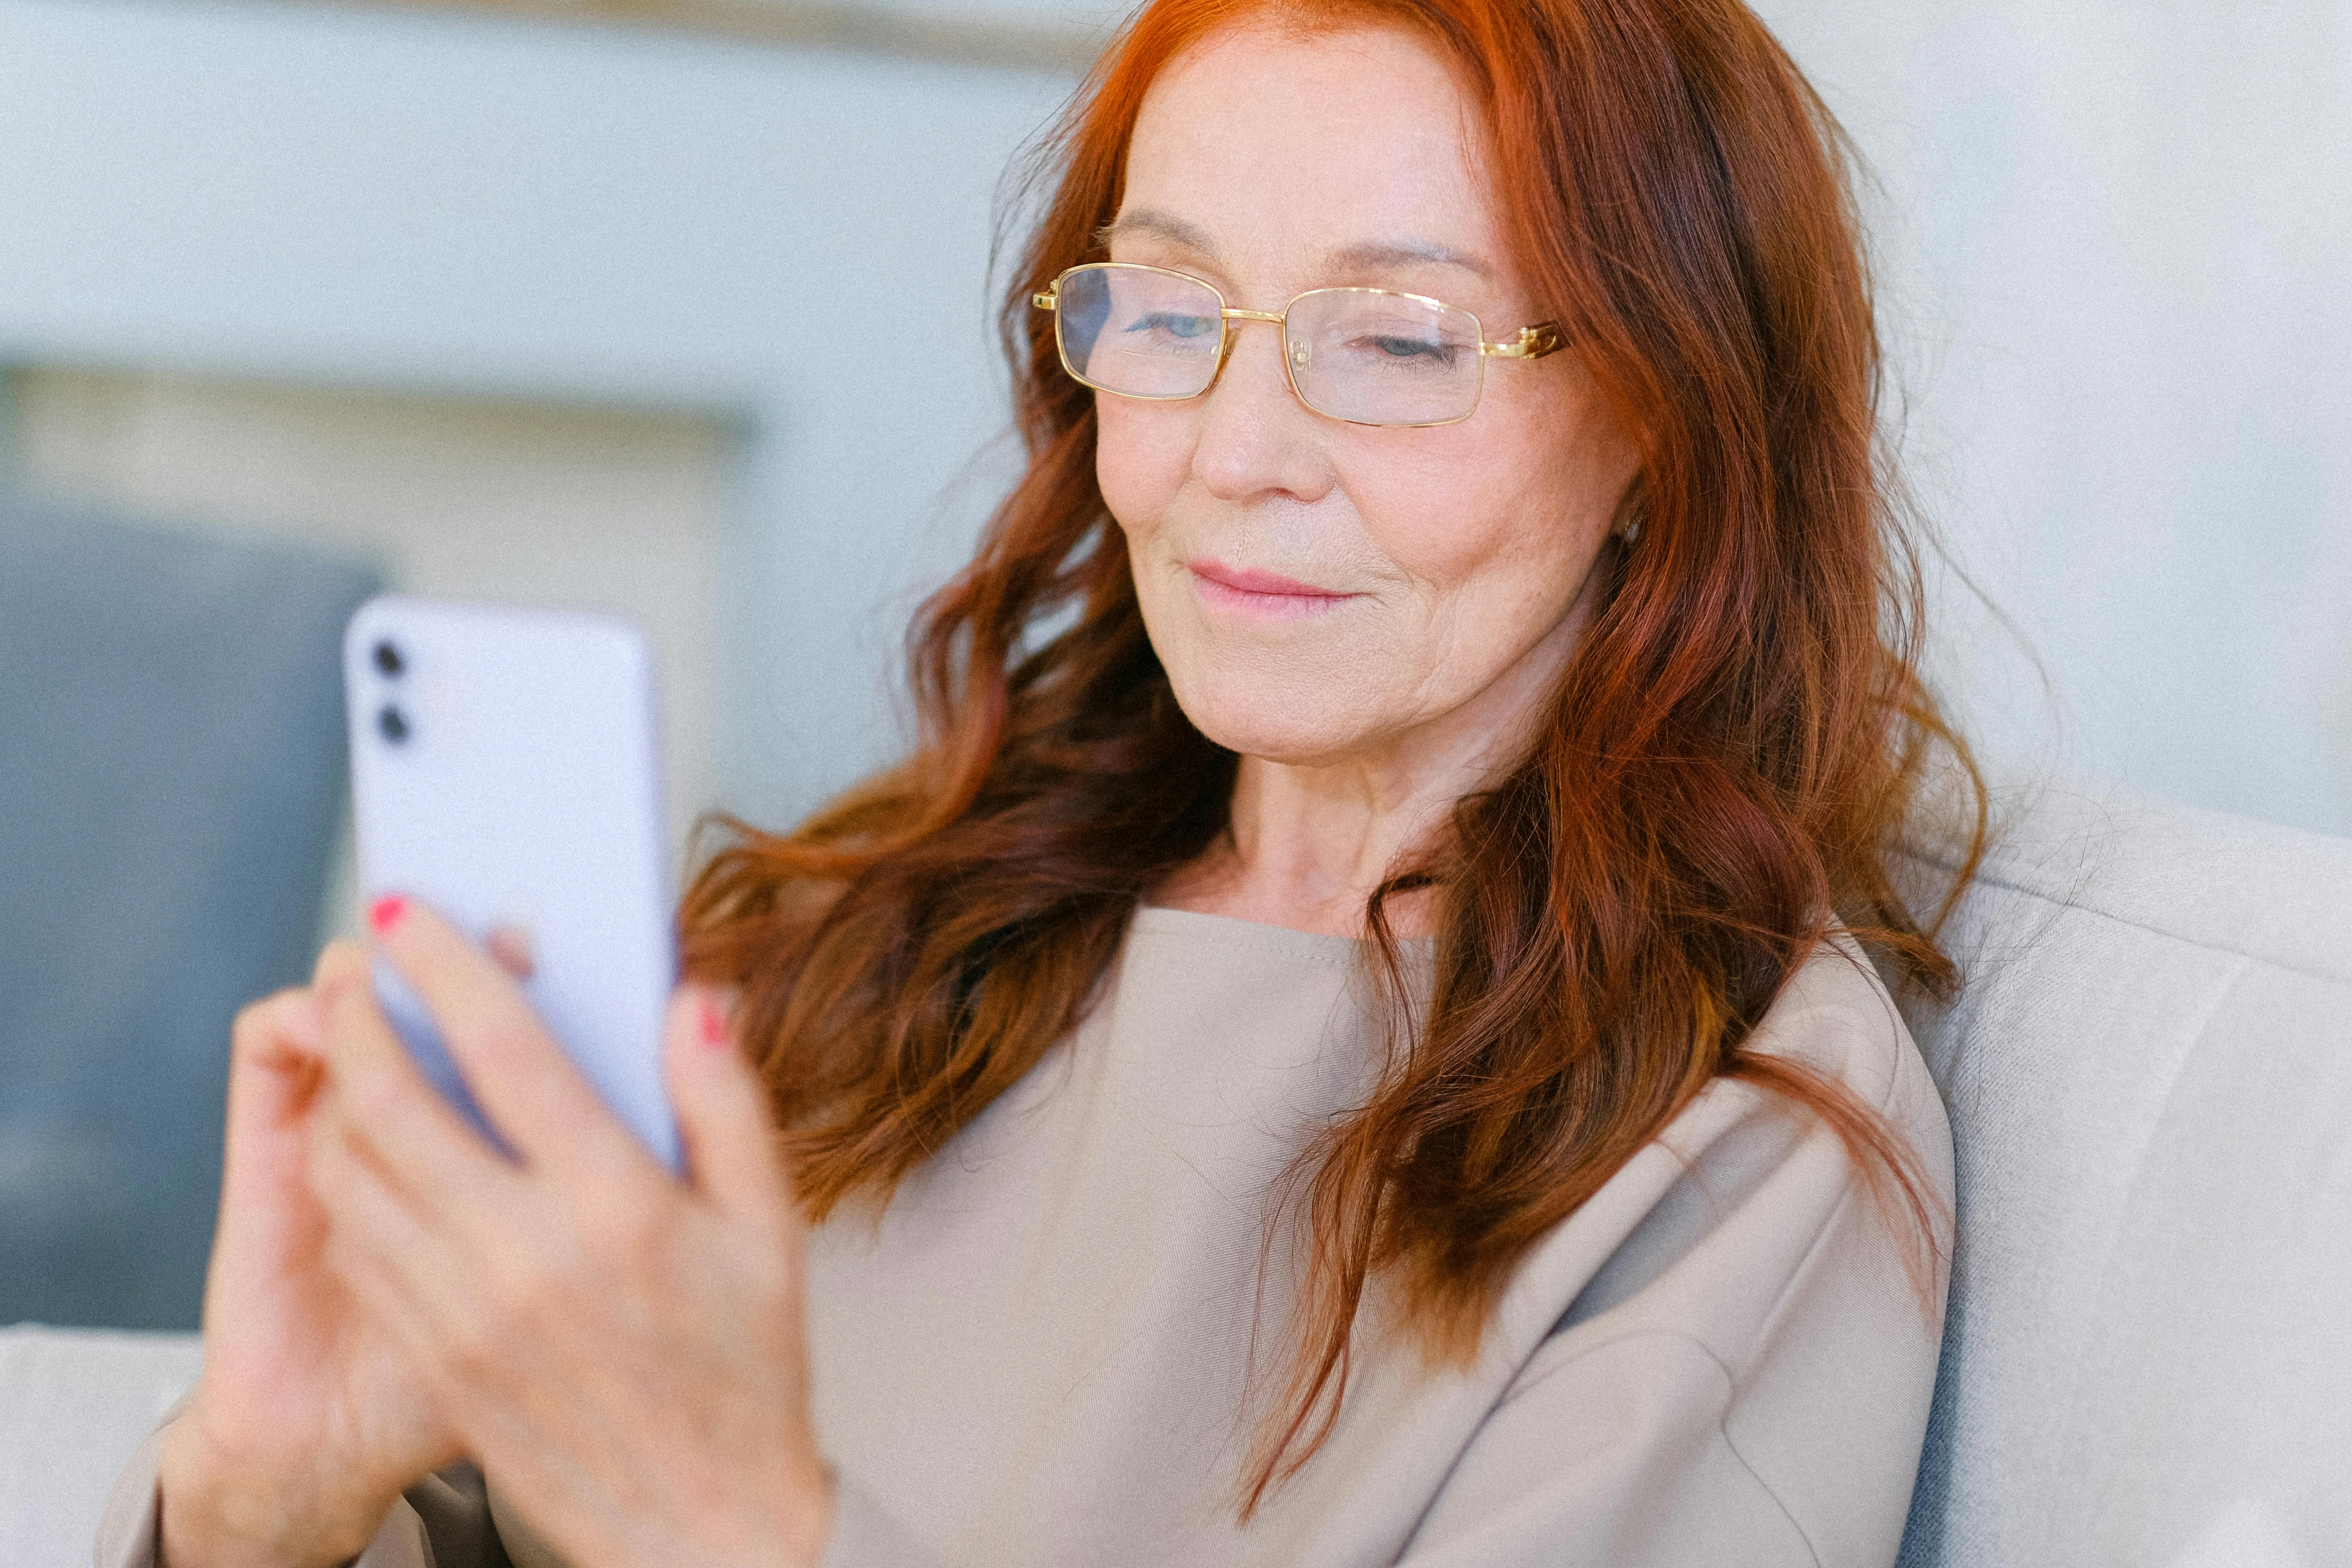 A woman reading a message on her phone | Source: Pexels